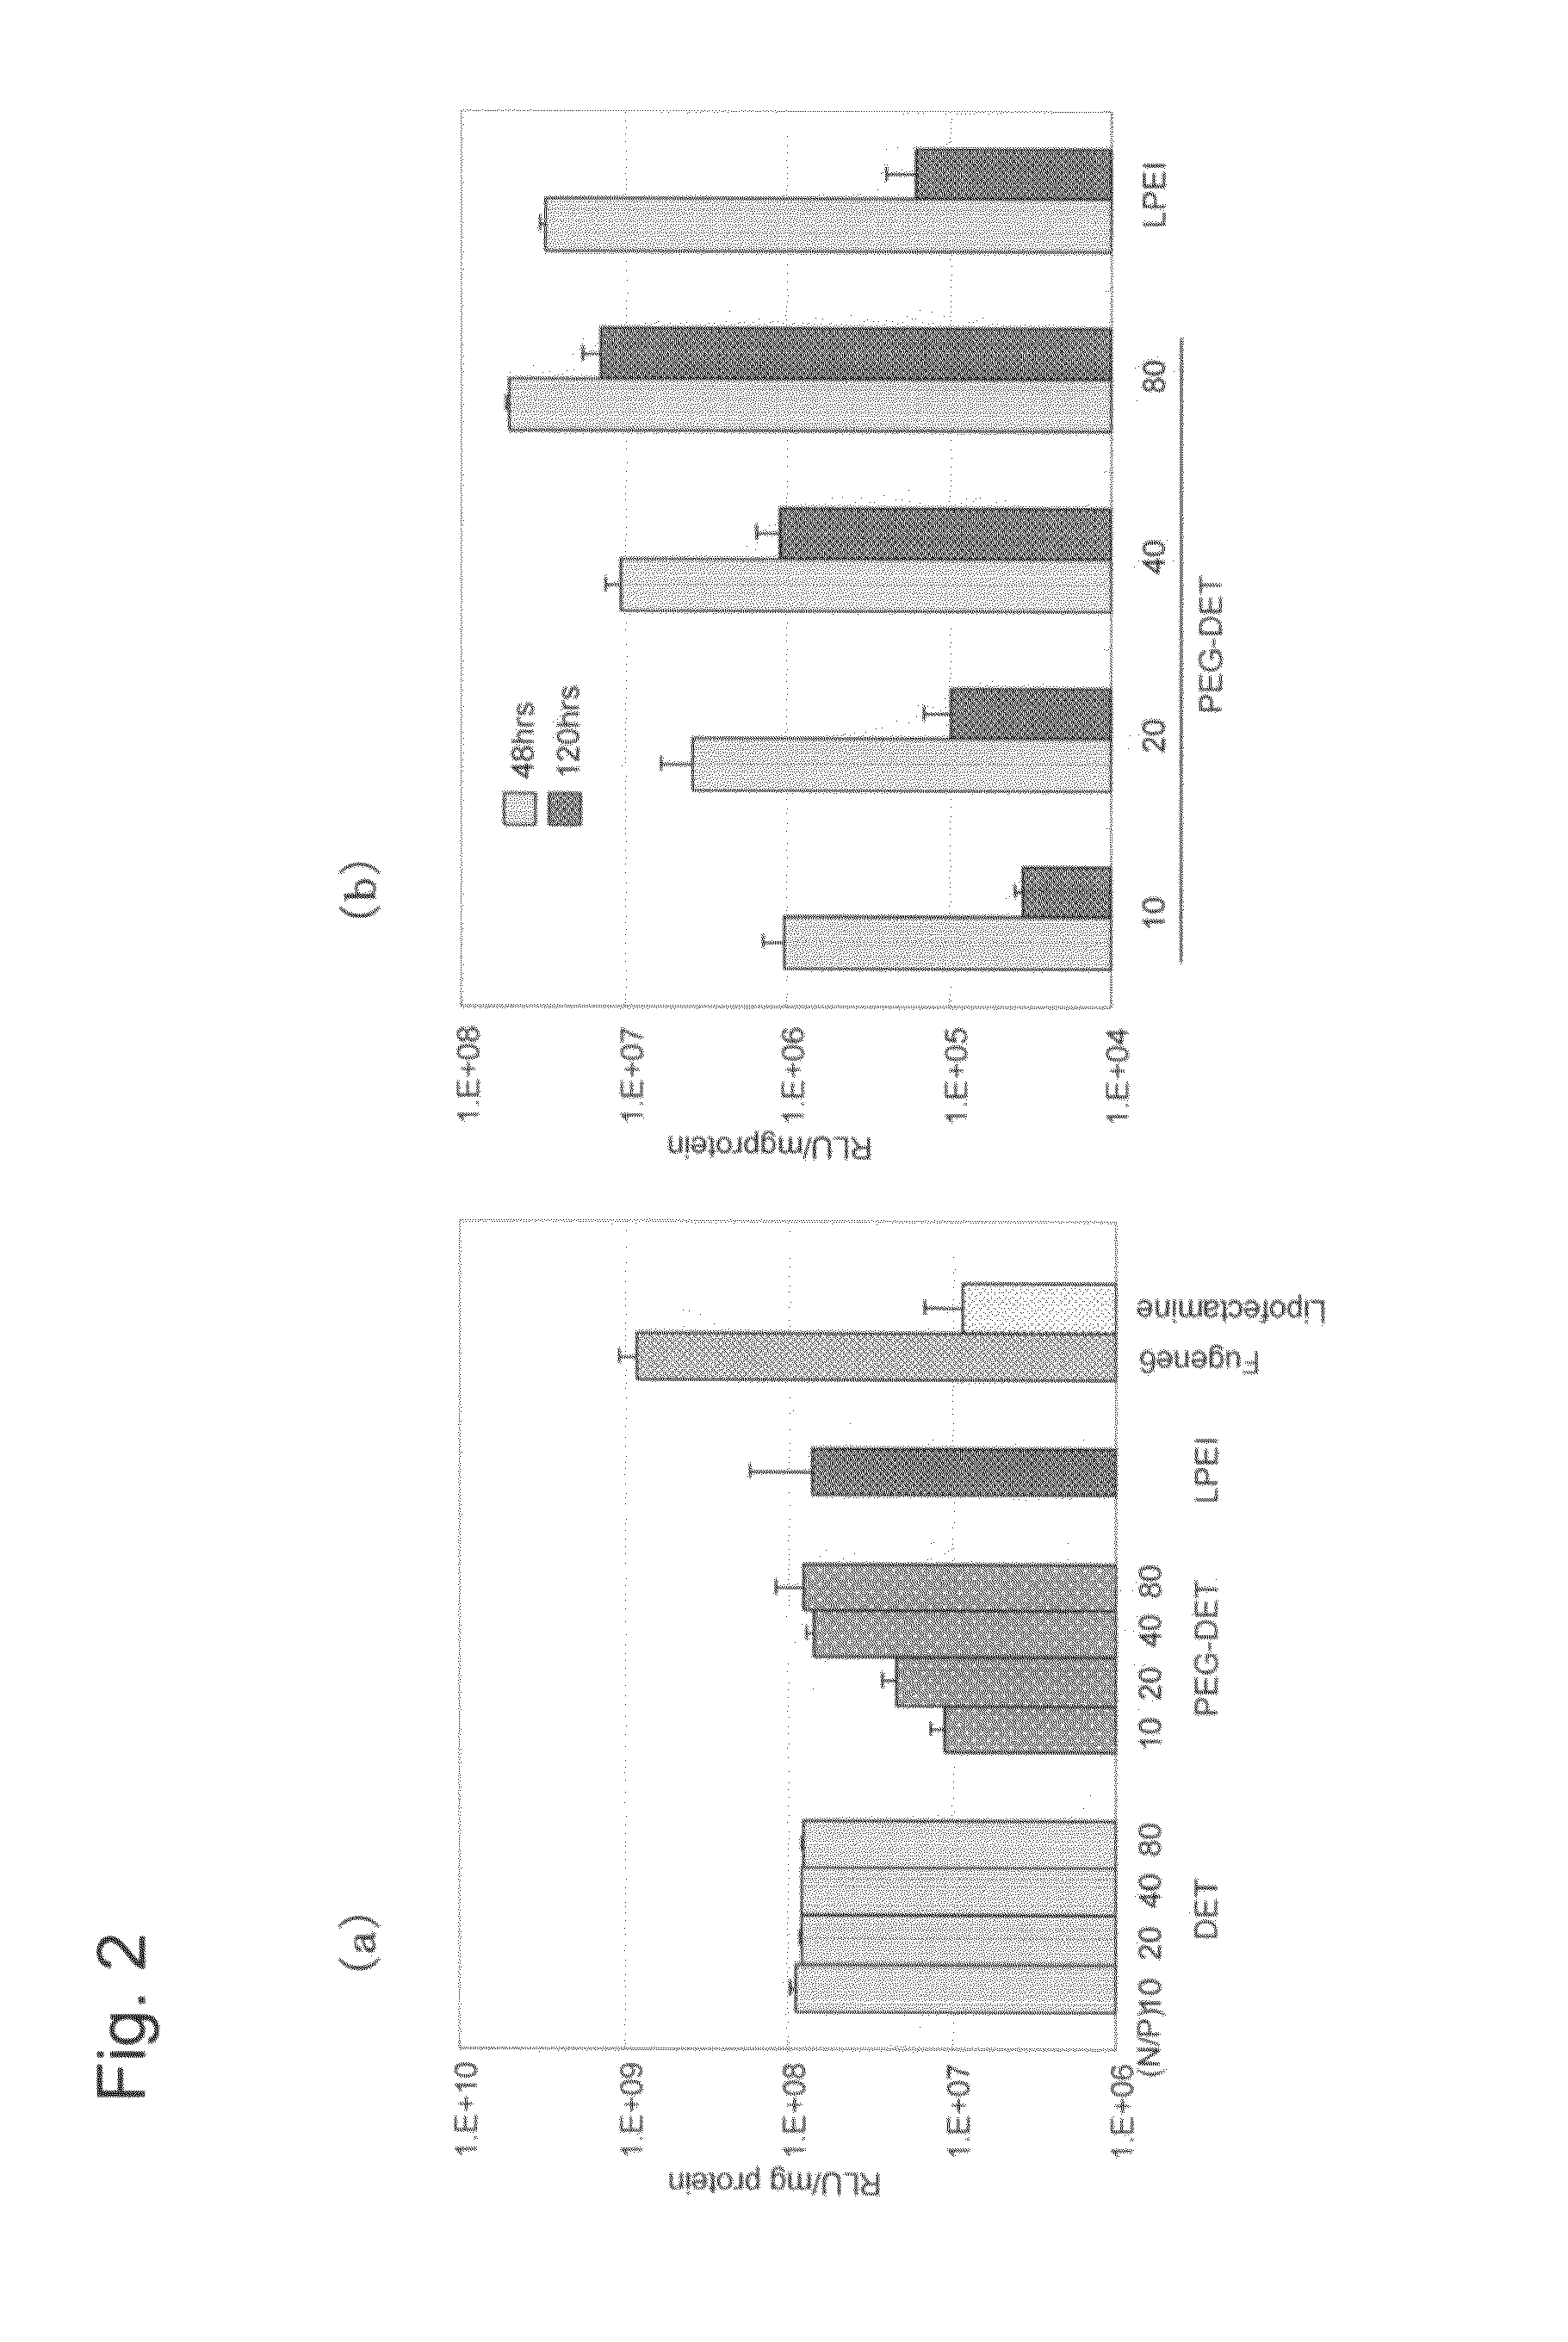 Polycationically charged polymer and the use of the same as a carrier for nucleic acid